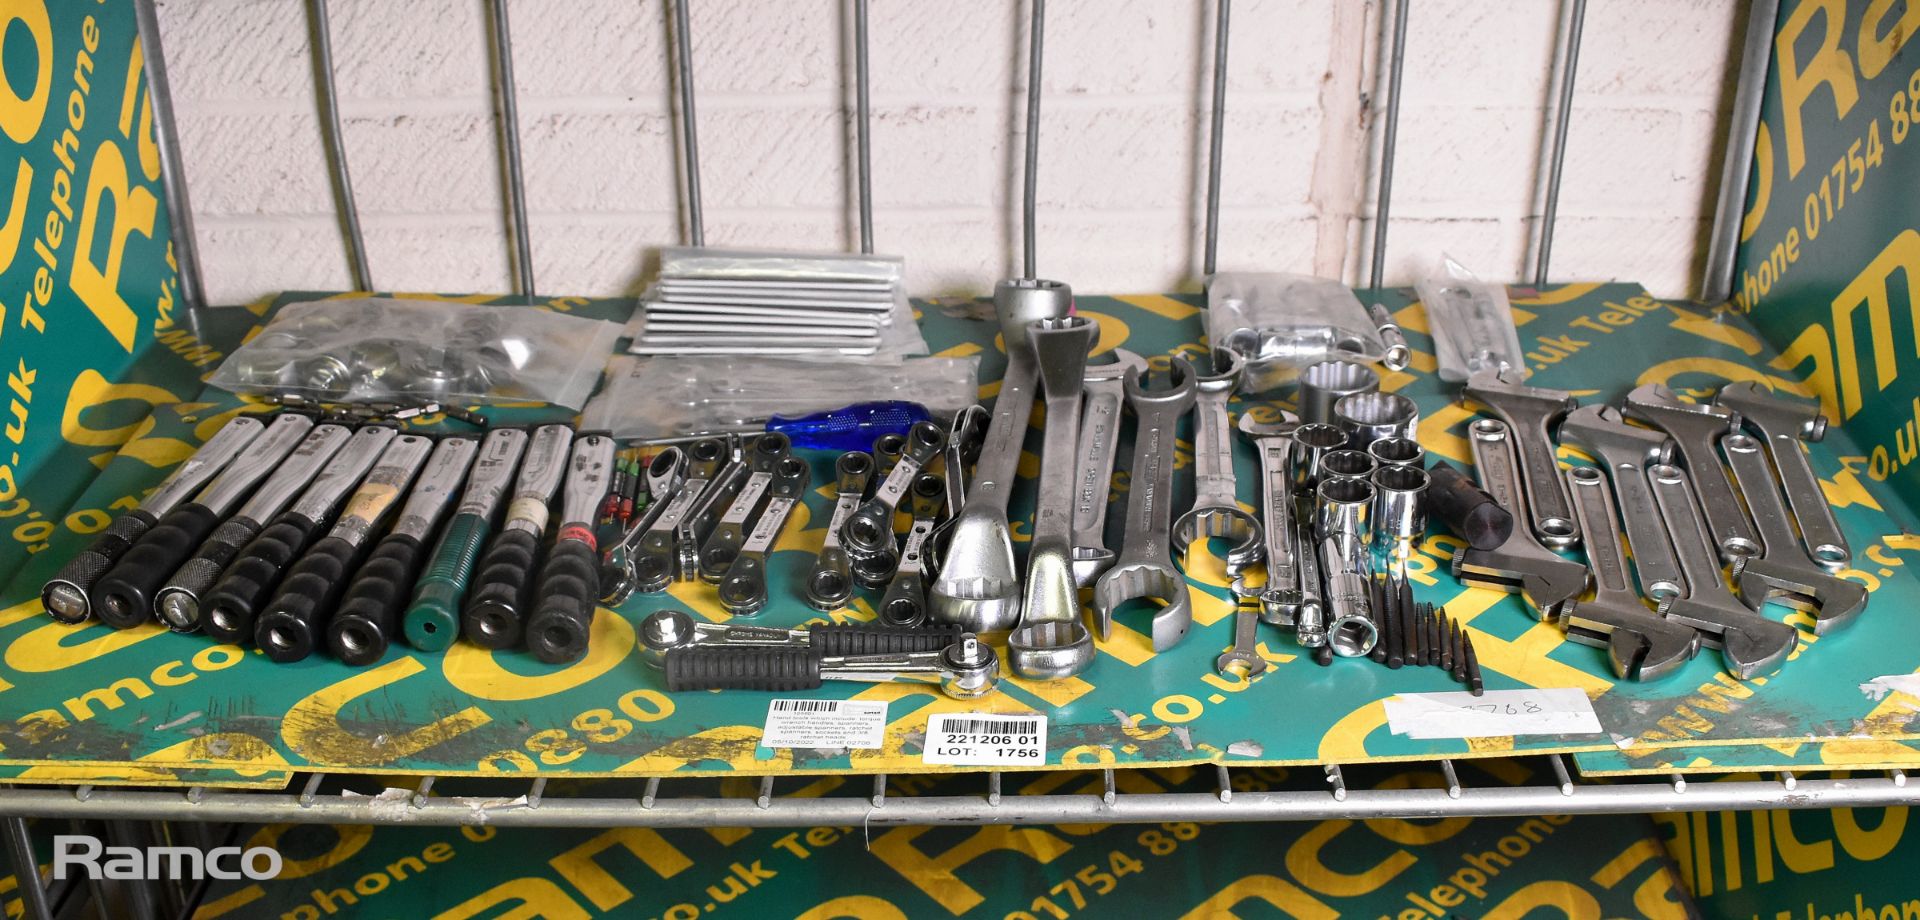 Hand tools - torque wrench handles, spanners, adjustable spanners, ratchet spanners, sockets